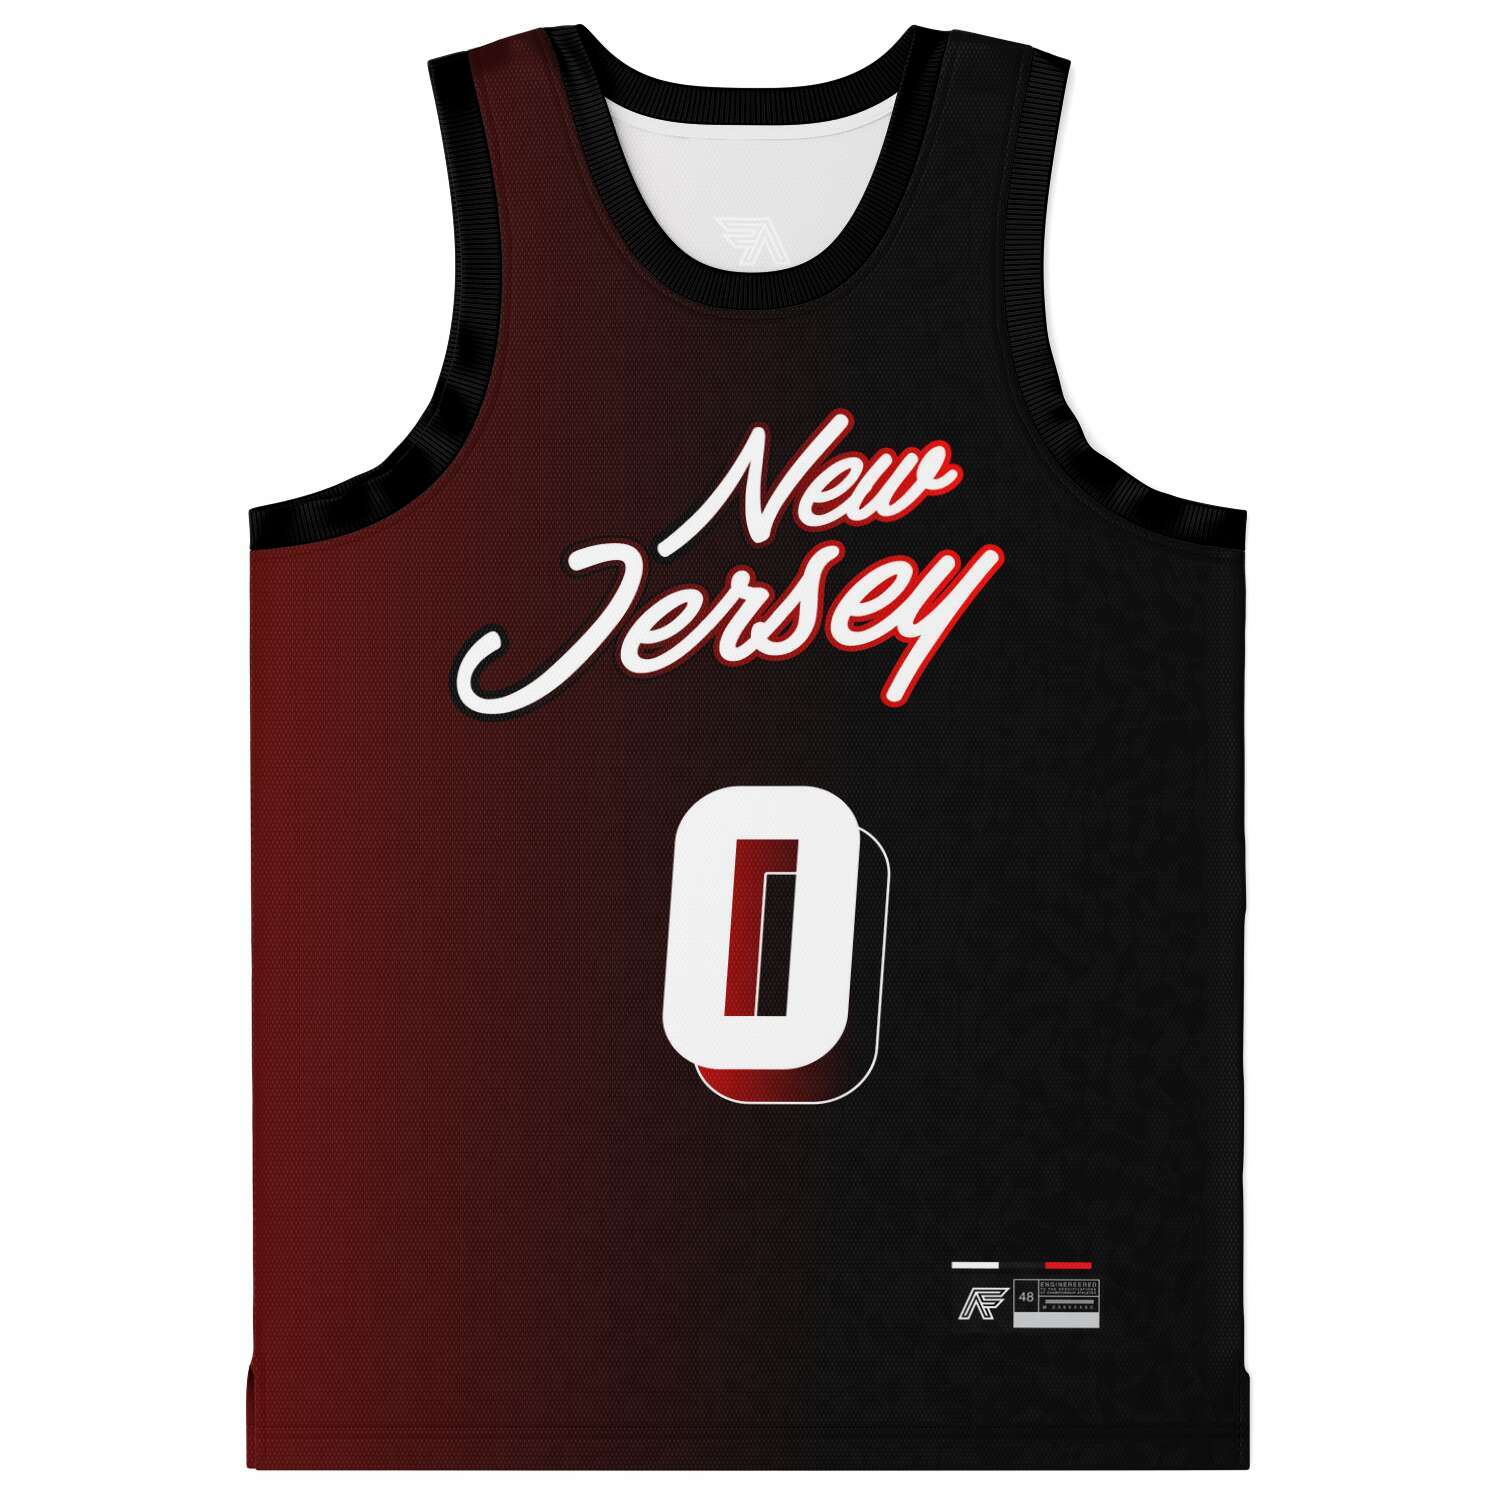 Customizable Garden State Jersey (Free Shipping Included)